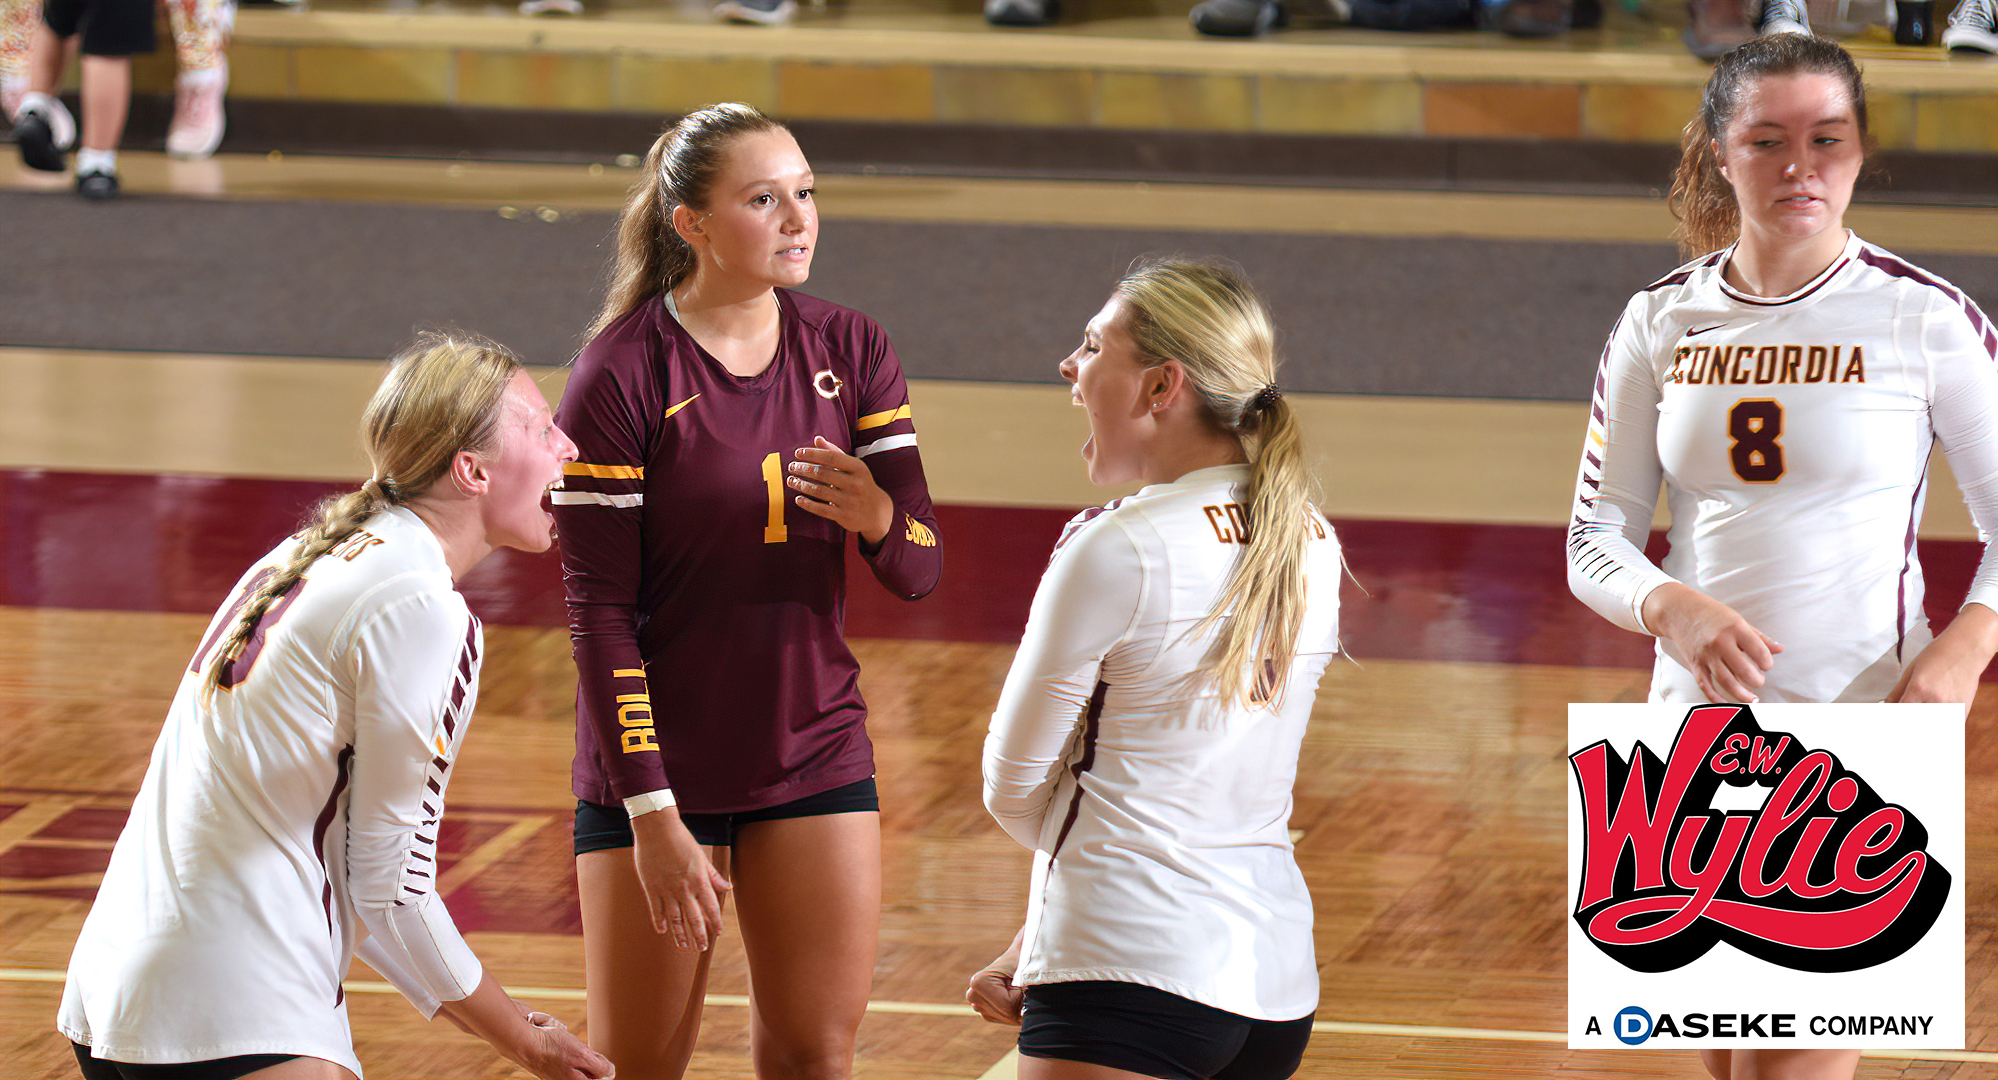 Concordia swept St. Mary's and lost a 5-set thriller to Central. Chloe Markovic (#1) has the second 30-dig match of her career vs. Central.